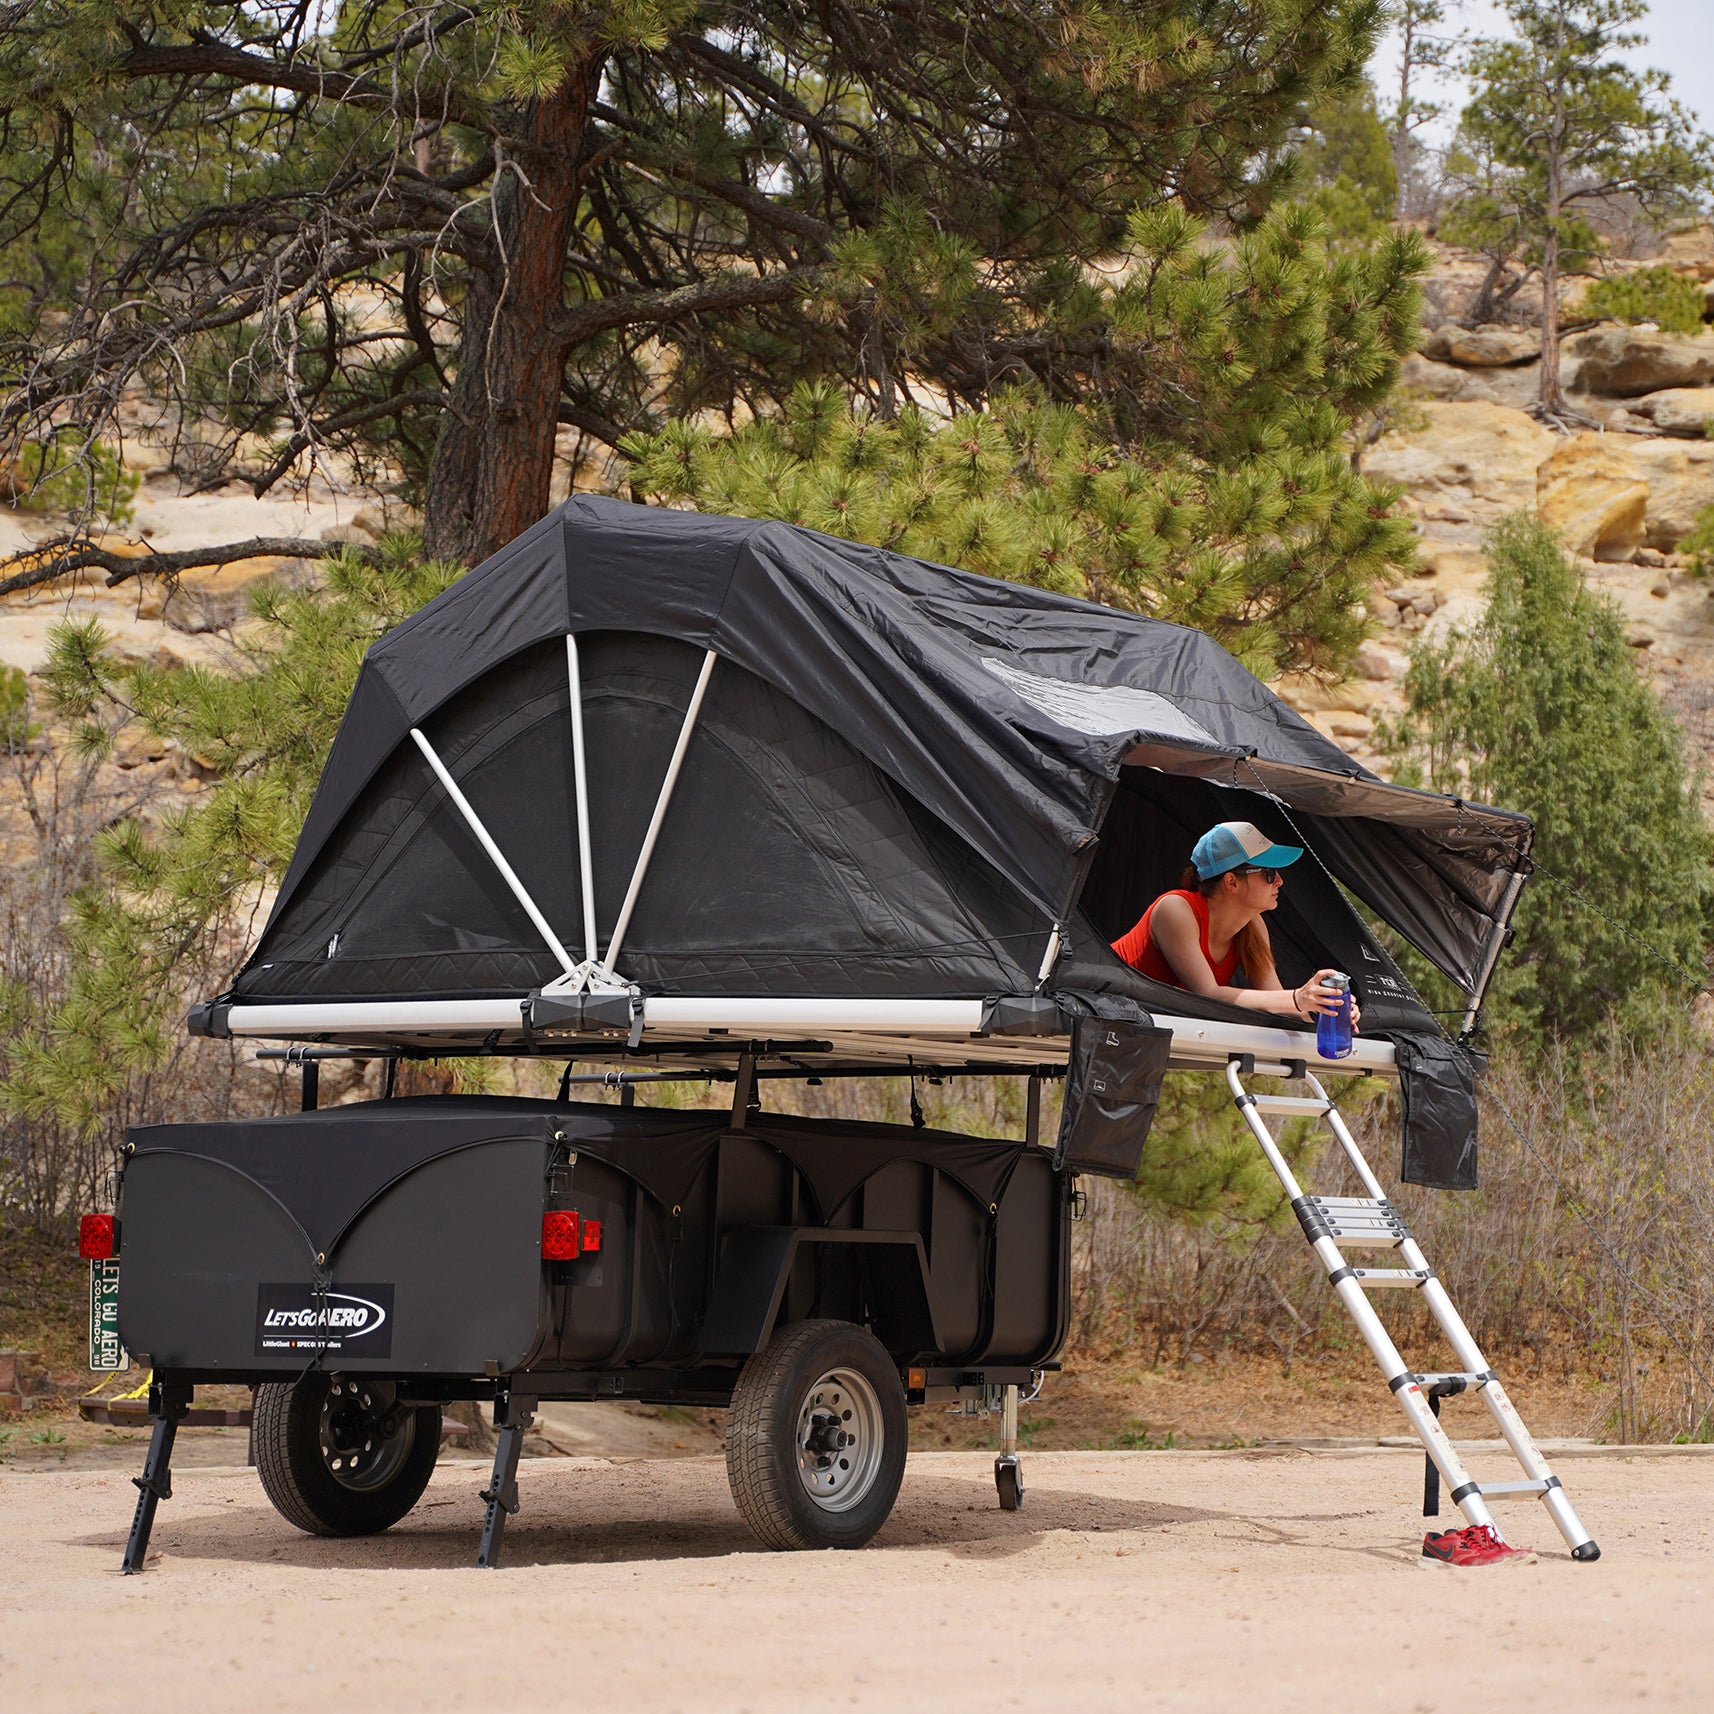 LittleGiant Trailer with a Roof Top Tent